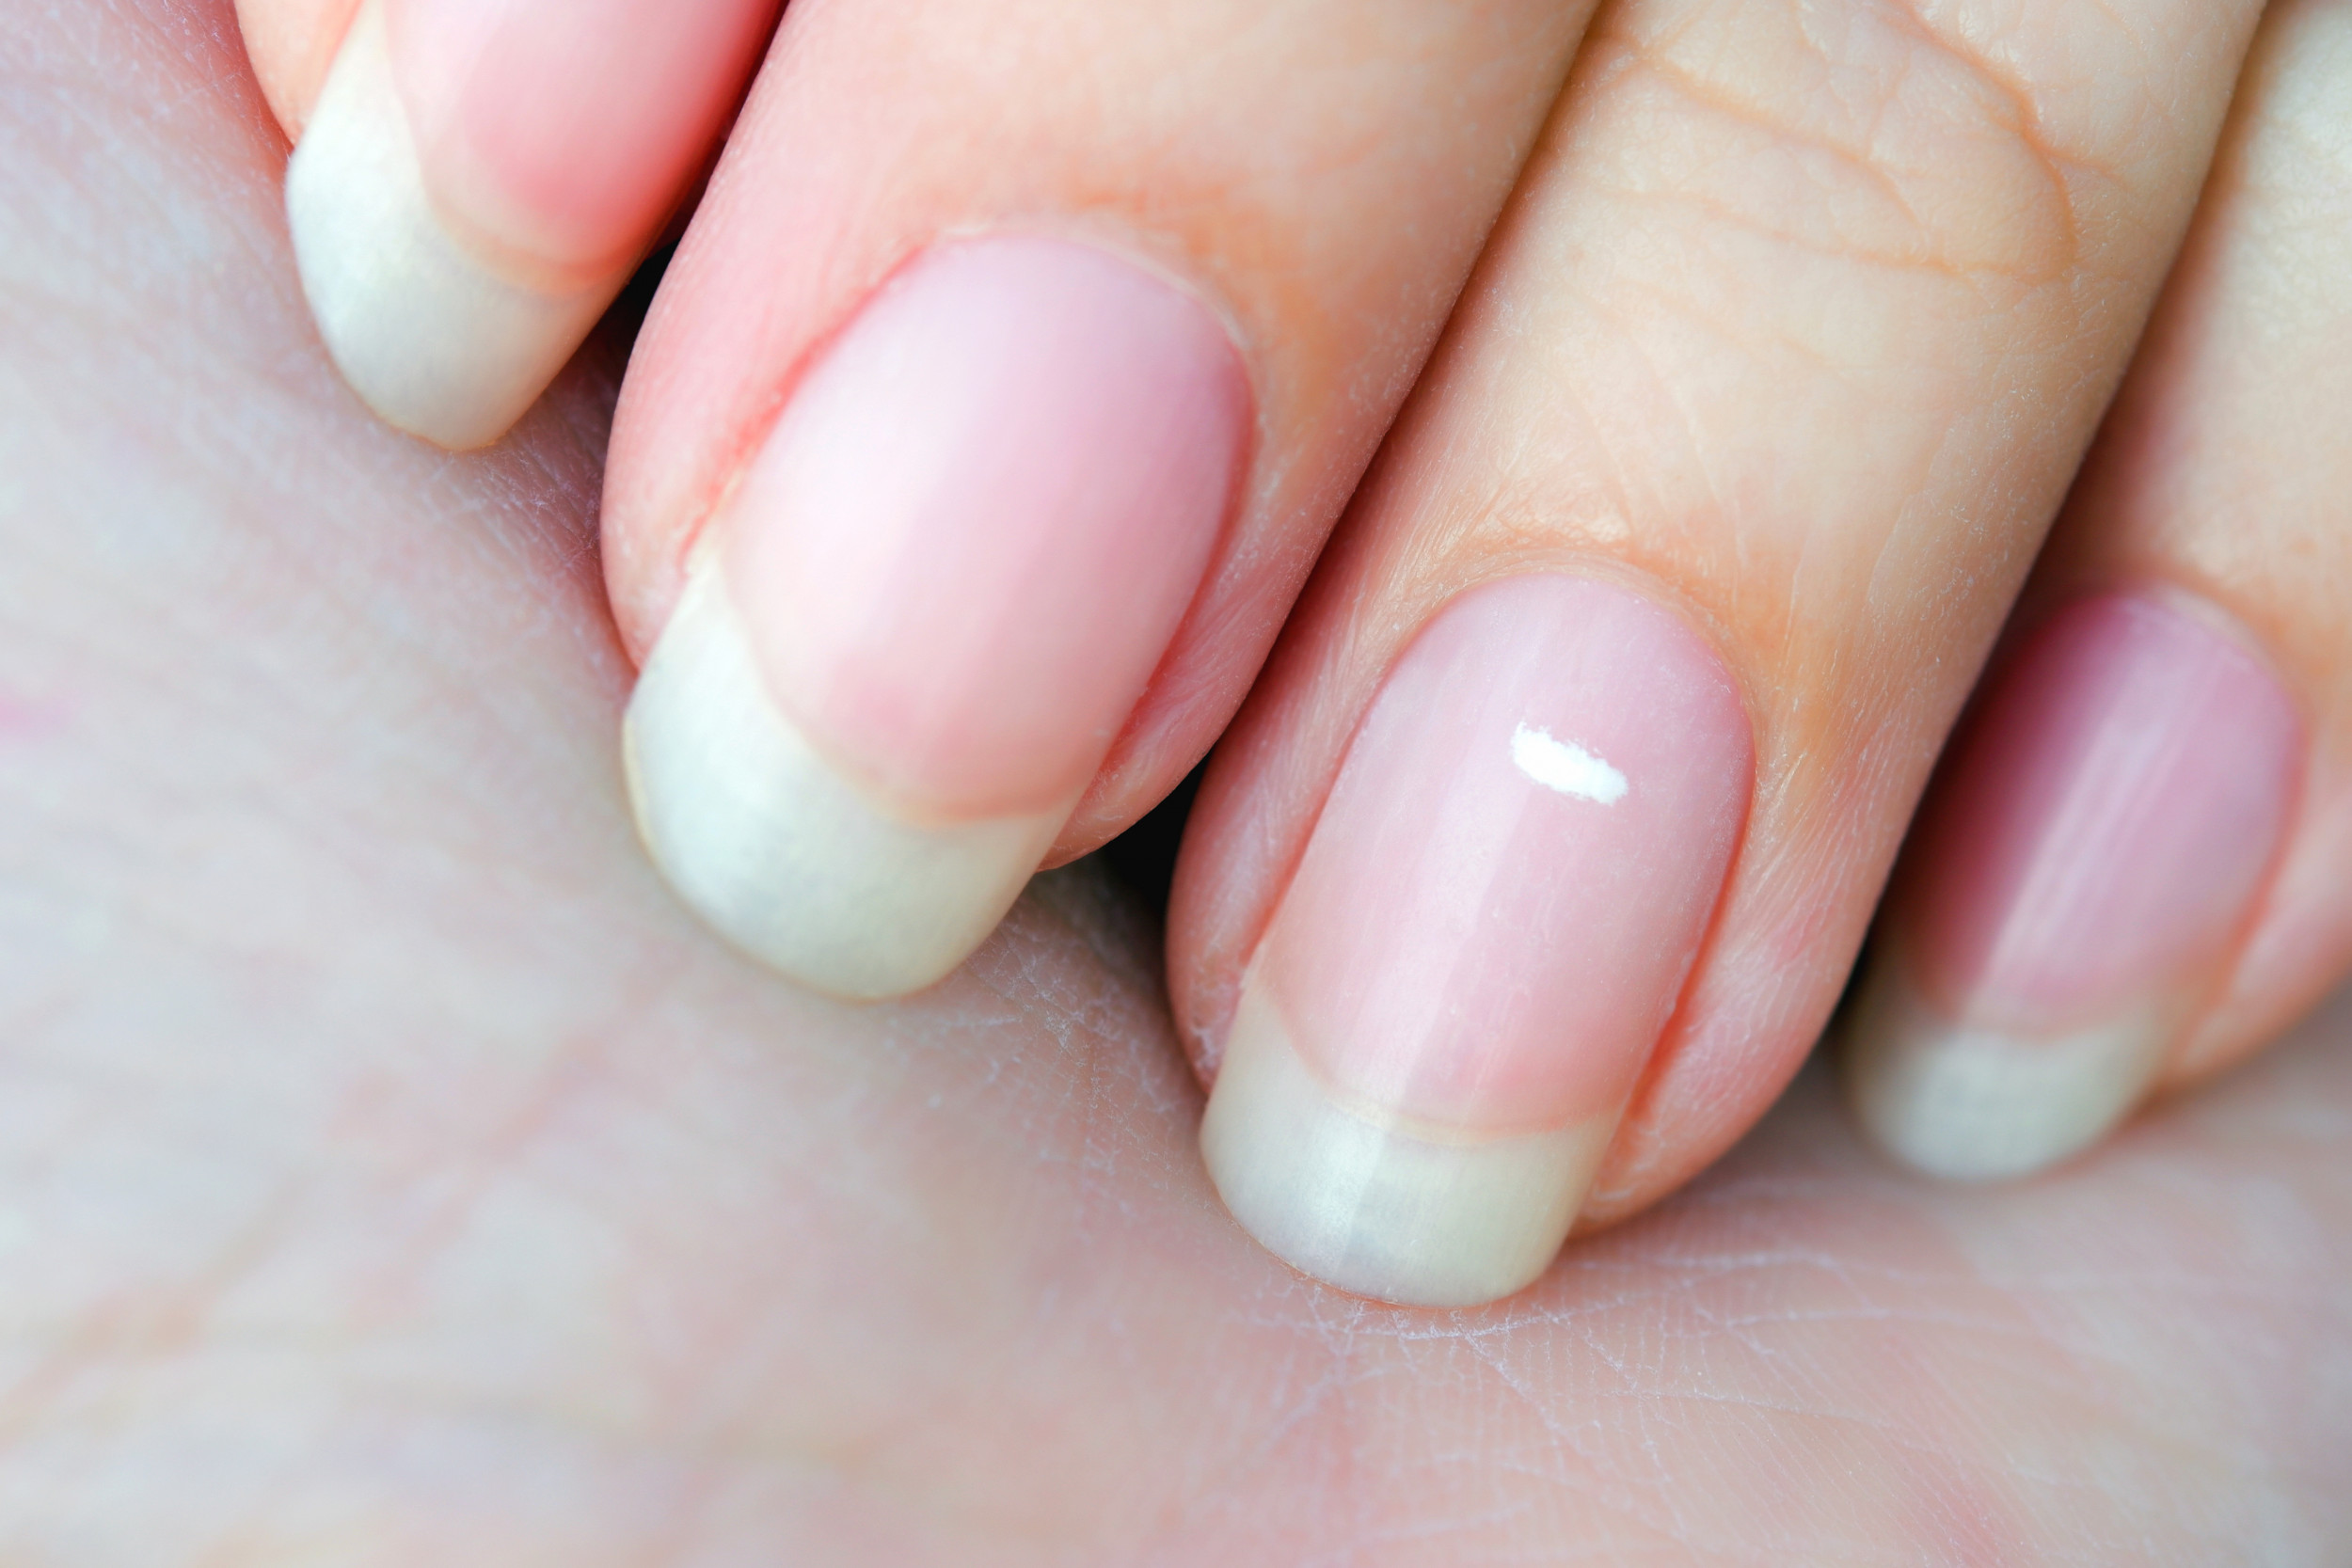 What are the little half moons in our nails? - Quora